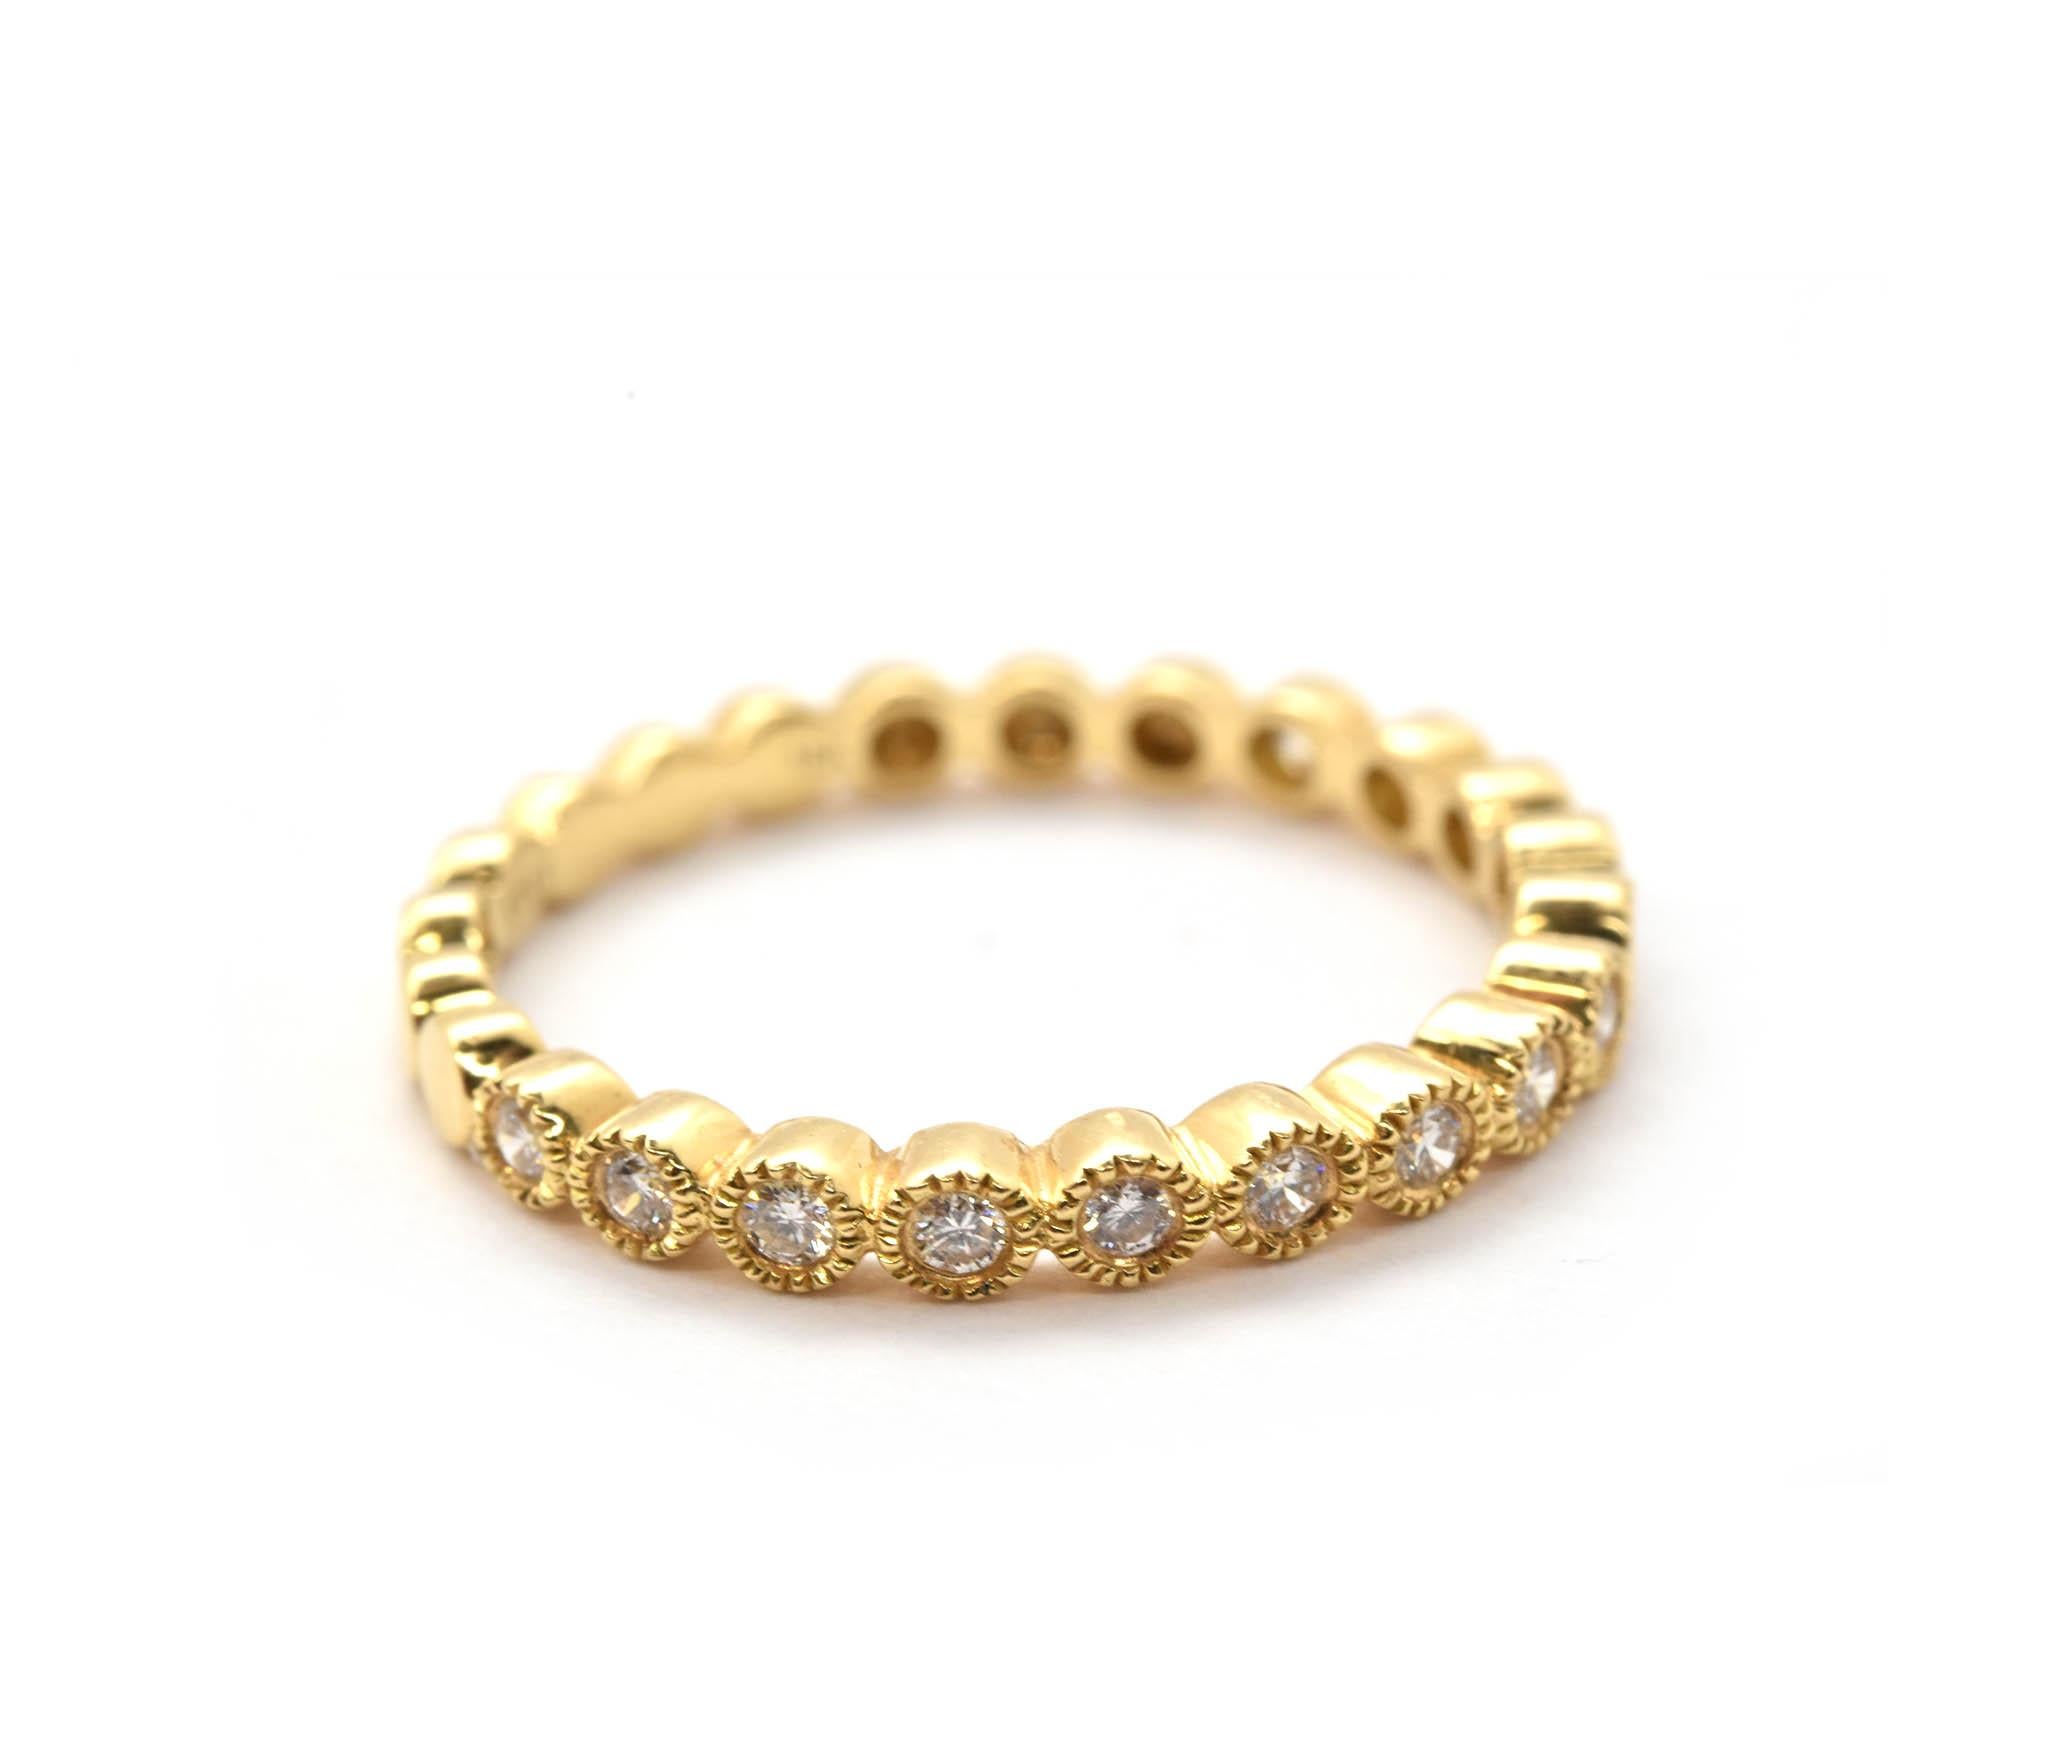 This is a simple yet intricately made diamond band fashioned from 18k yellow gold. Diamonds are bezel set into the front of the band, each diamond has a bezel with a granulated trim. The other side of the band is made in oval shapes. Total carat